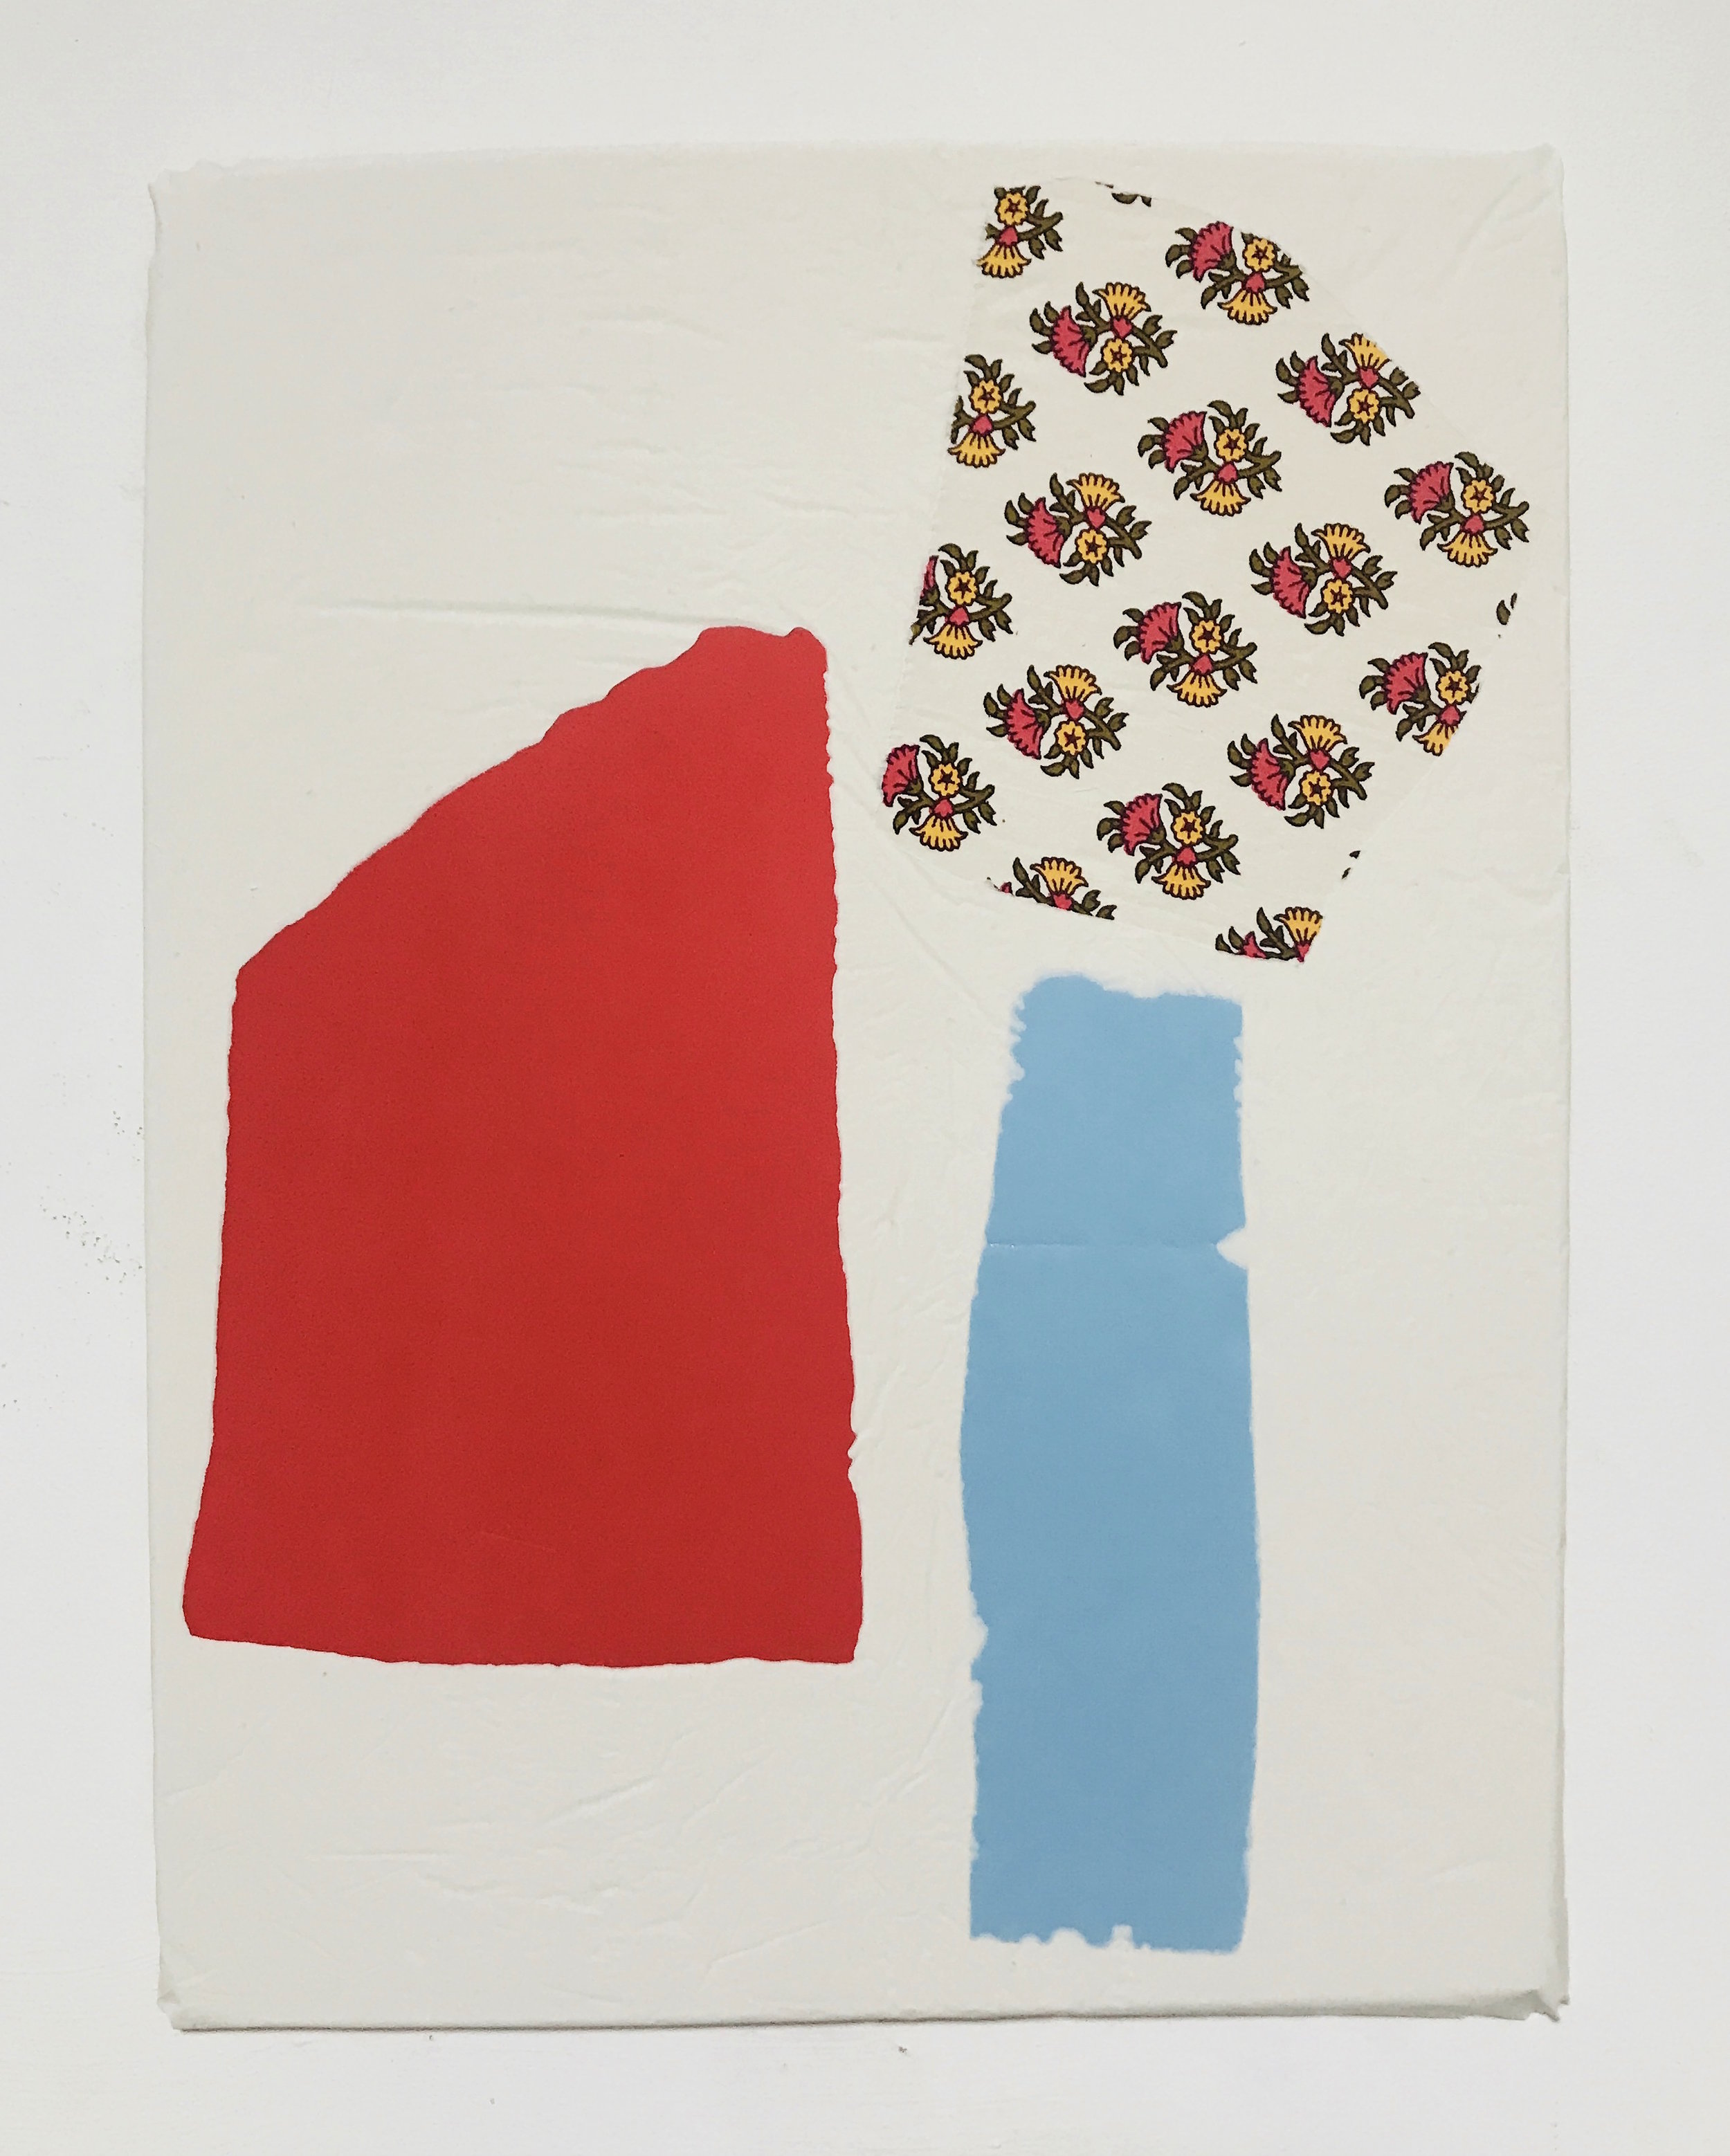 Untitled Fragment (red foam, blue pvc, cotton) | Composite and Mixed Media | 42 x 32cm